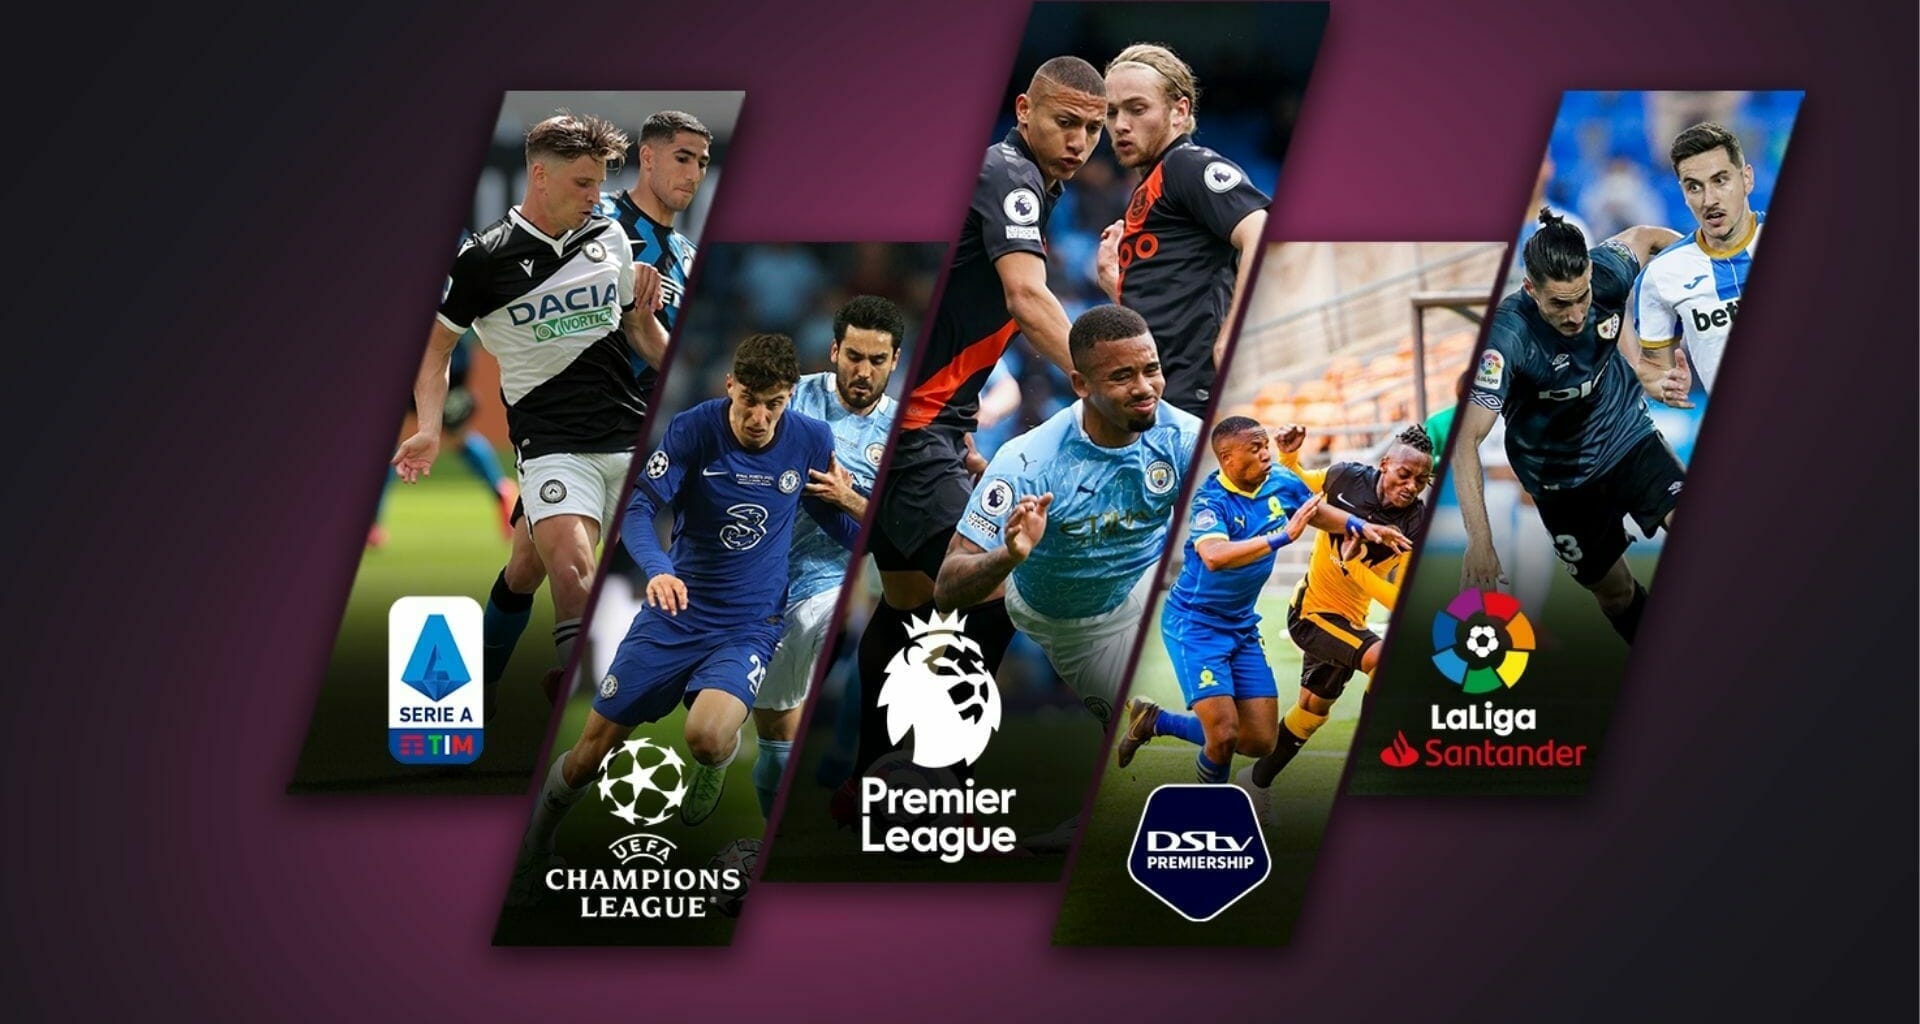 MultiChoice shuts down its sports streaming service — Showmax Pro